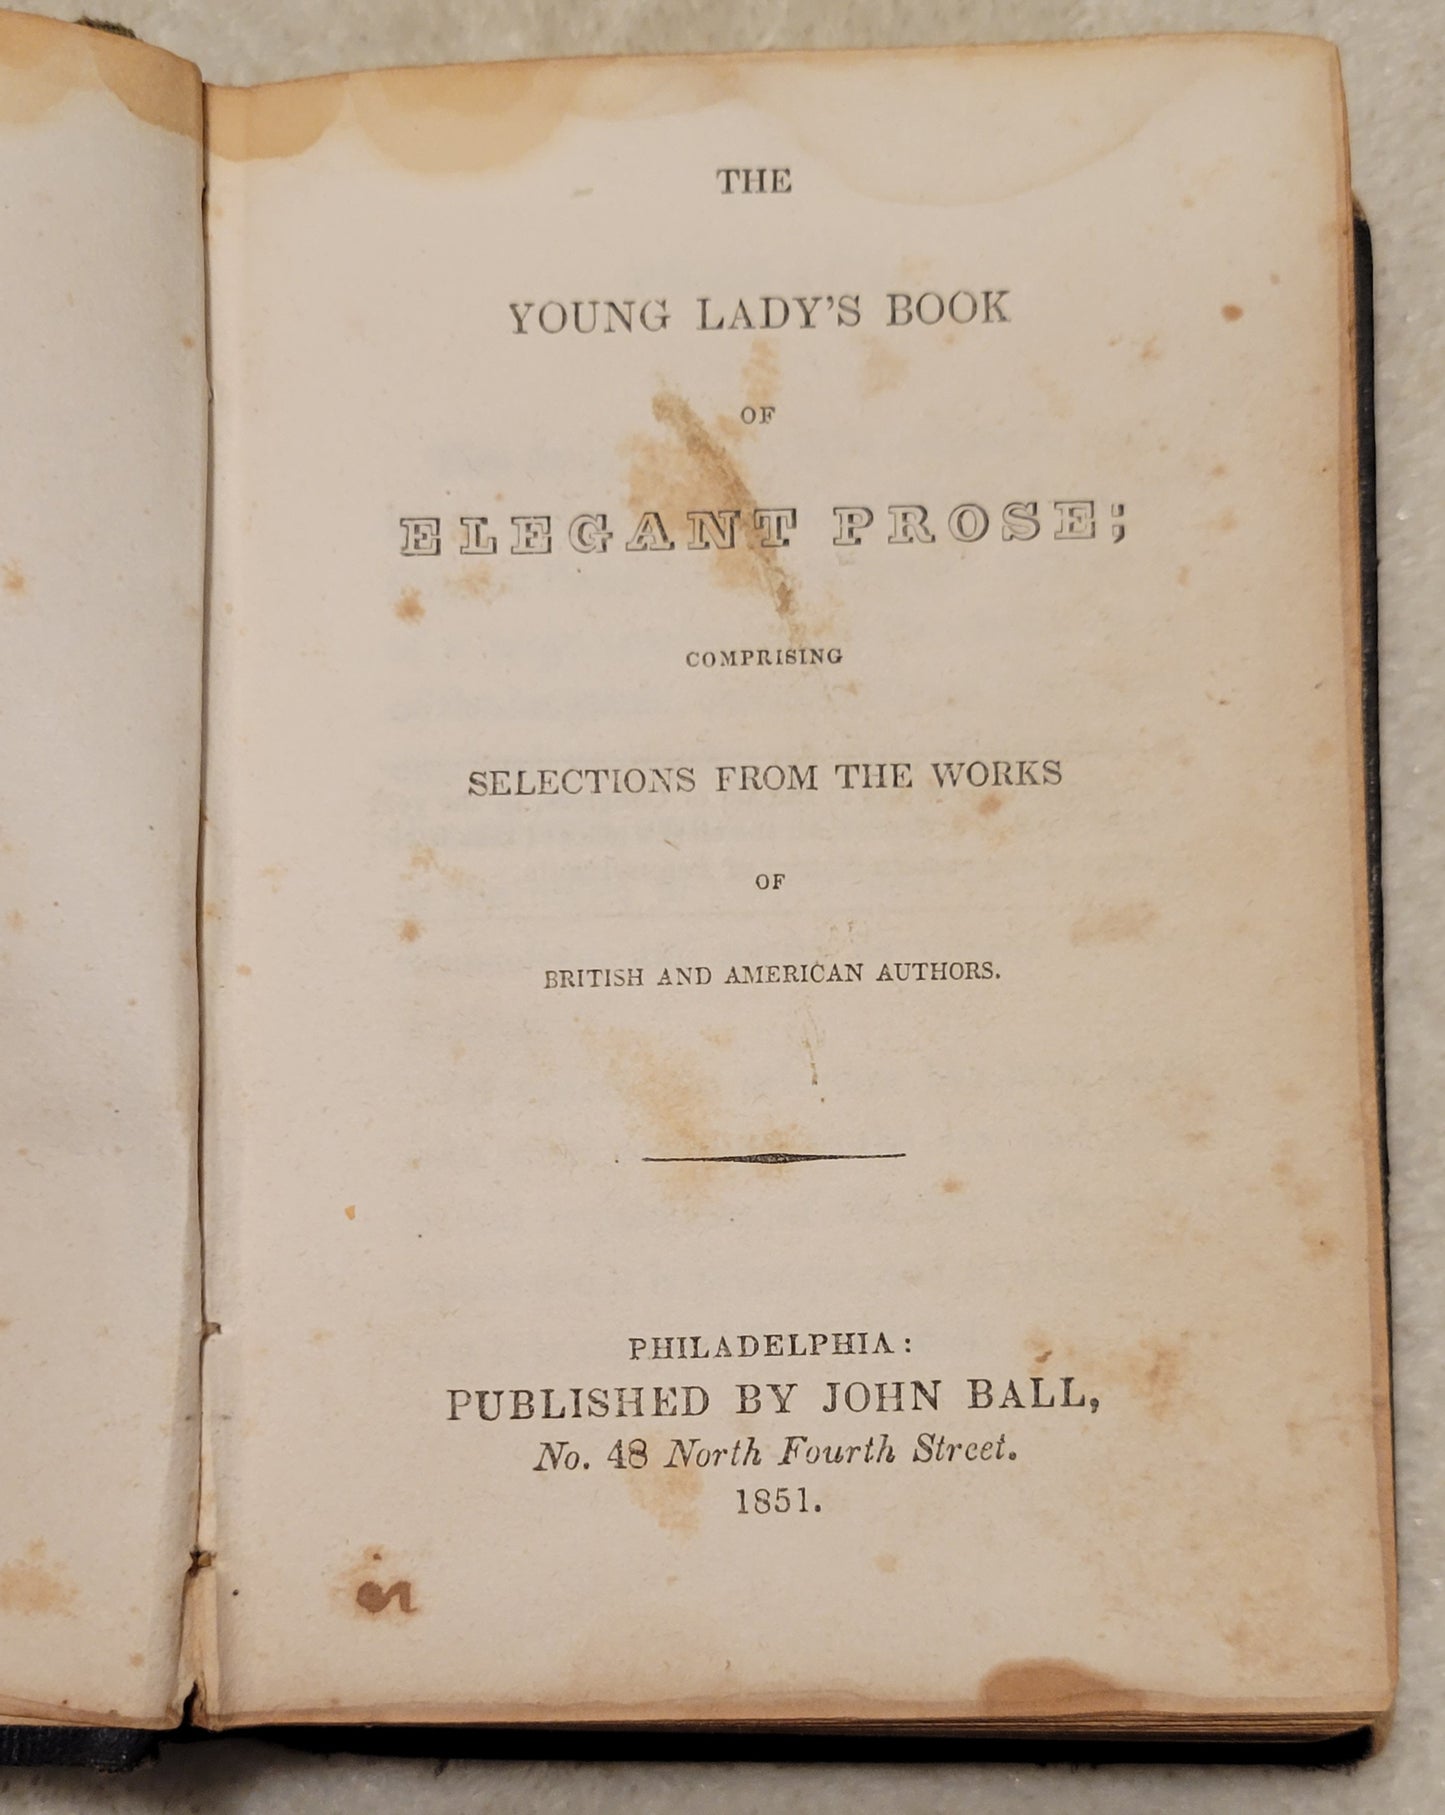 Antique book for sale “Young Lady's Book of Elegant Prose” by British and American authors, published by John Ball in Philadelphia in 1851. Title page.